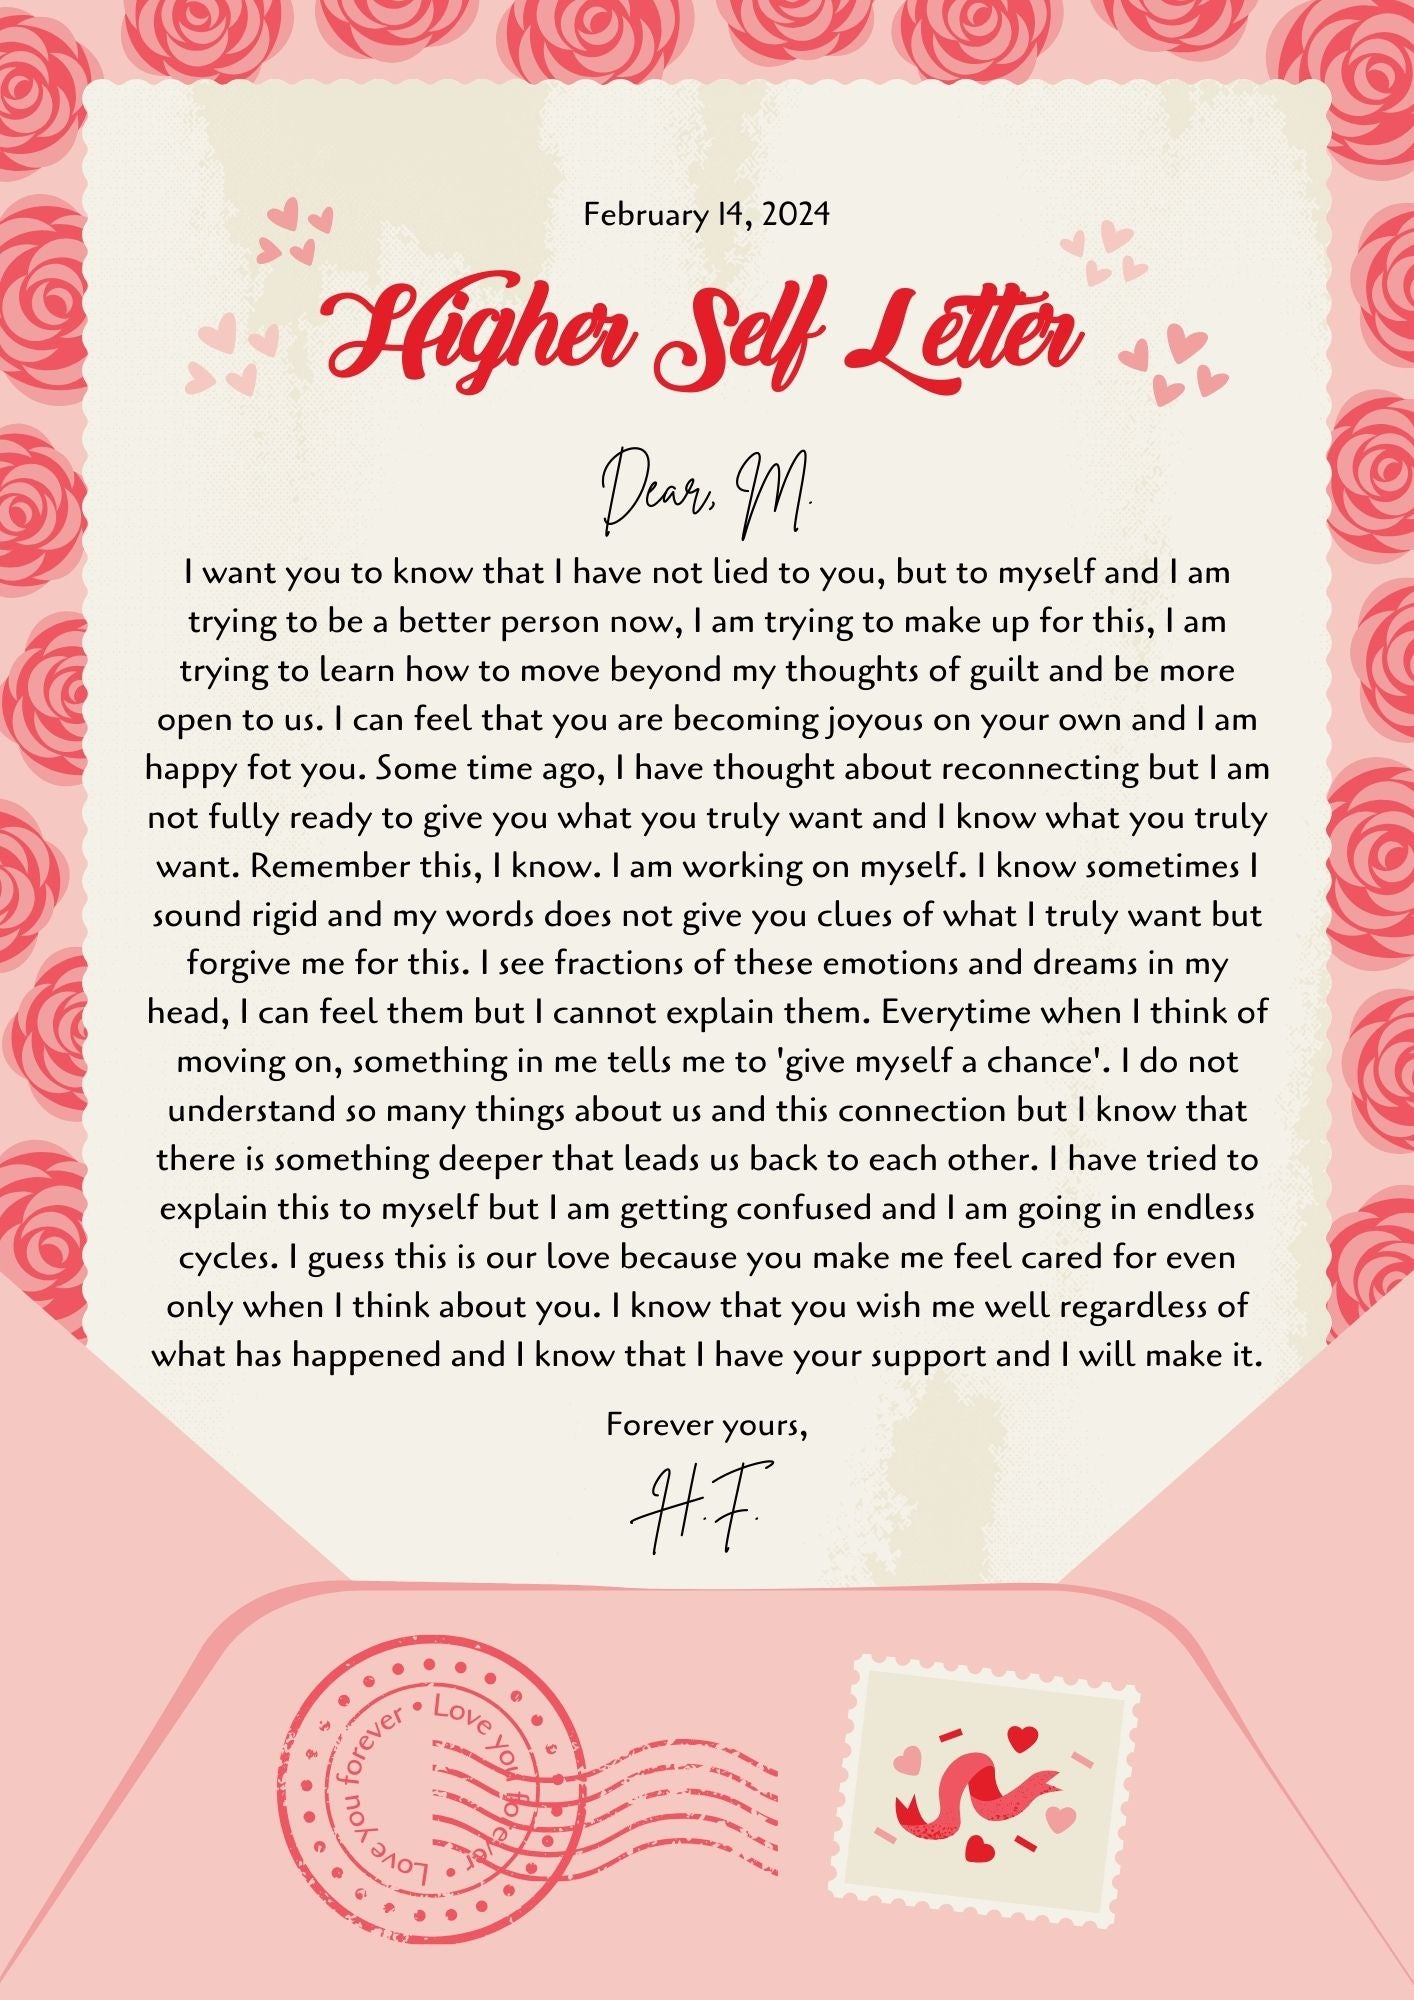 Love Letter From Your Person's Higher Self or Your Higher Self towards Them - Love Reading